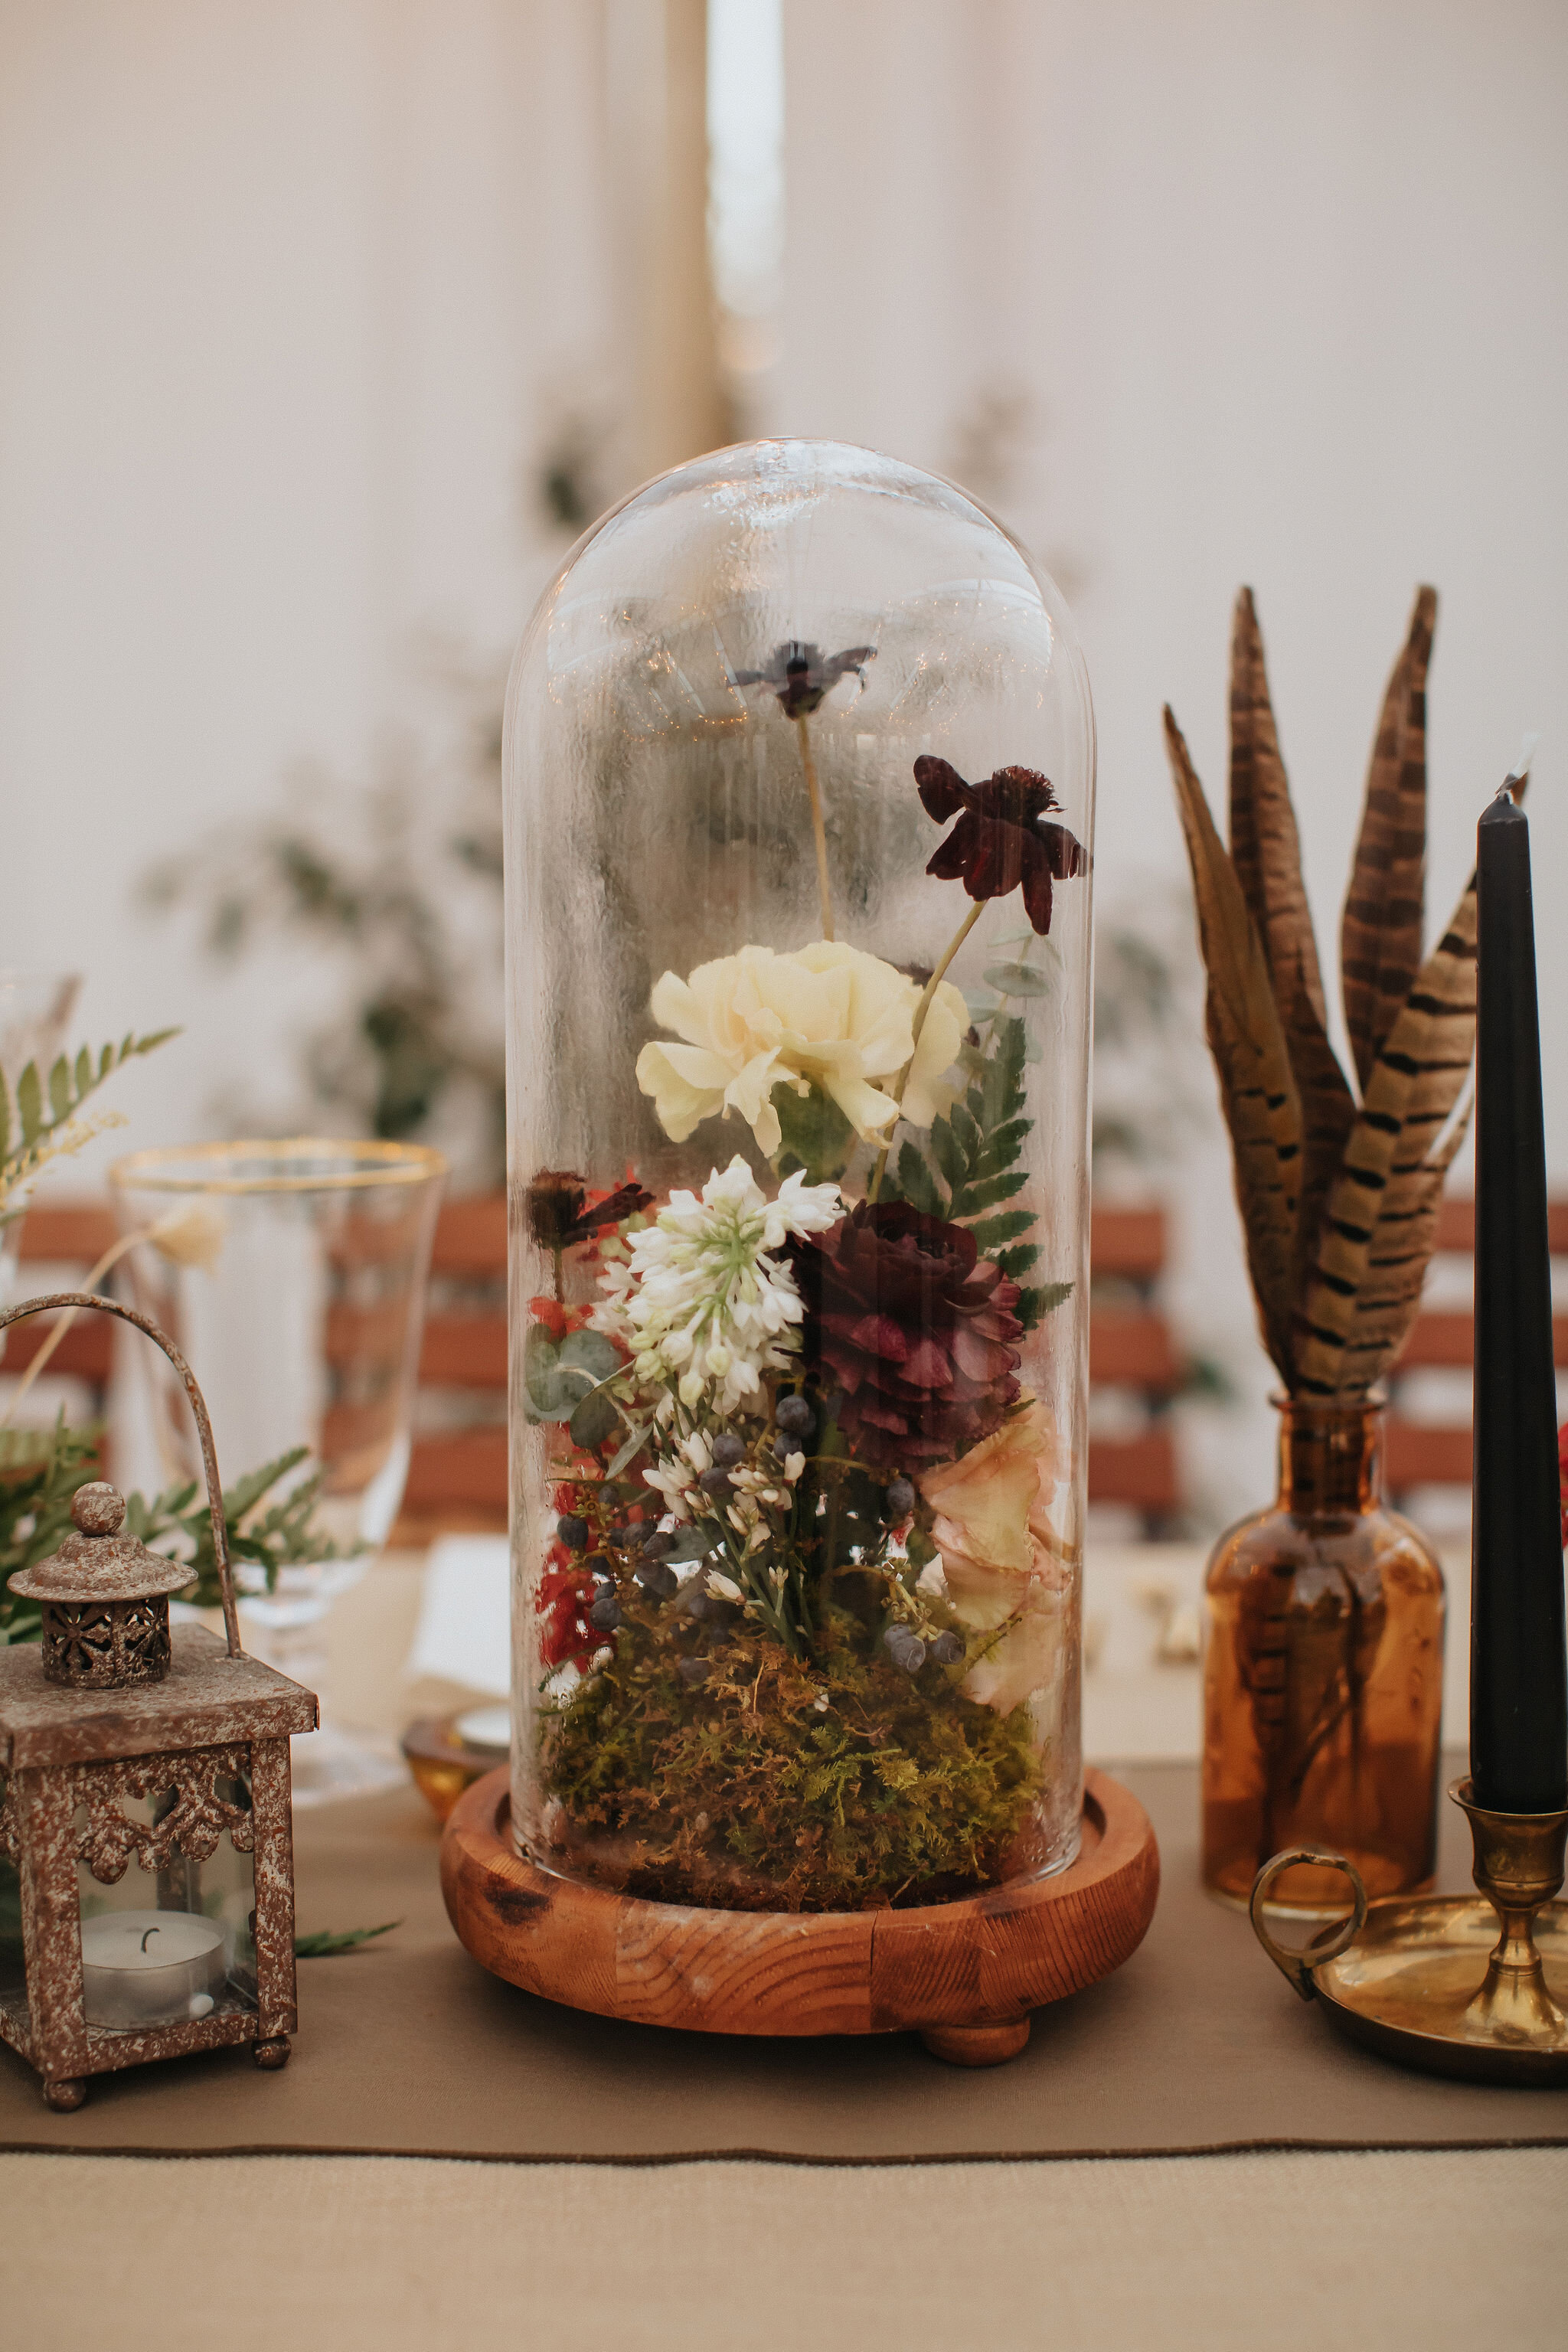 Earthy and romantic – this eclectic tablescape is crafted from pheasant feathers, brass candlesticks, and layered florals. Botanical cloches are filled with fern, moss, chocolate cosmos, and ranunculus. Designed by Nashville wedding floral designer,…